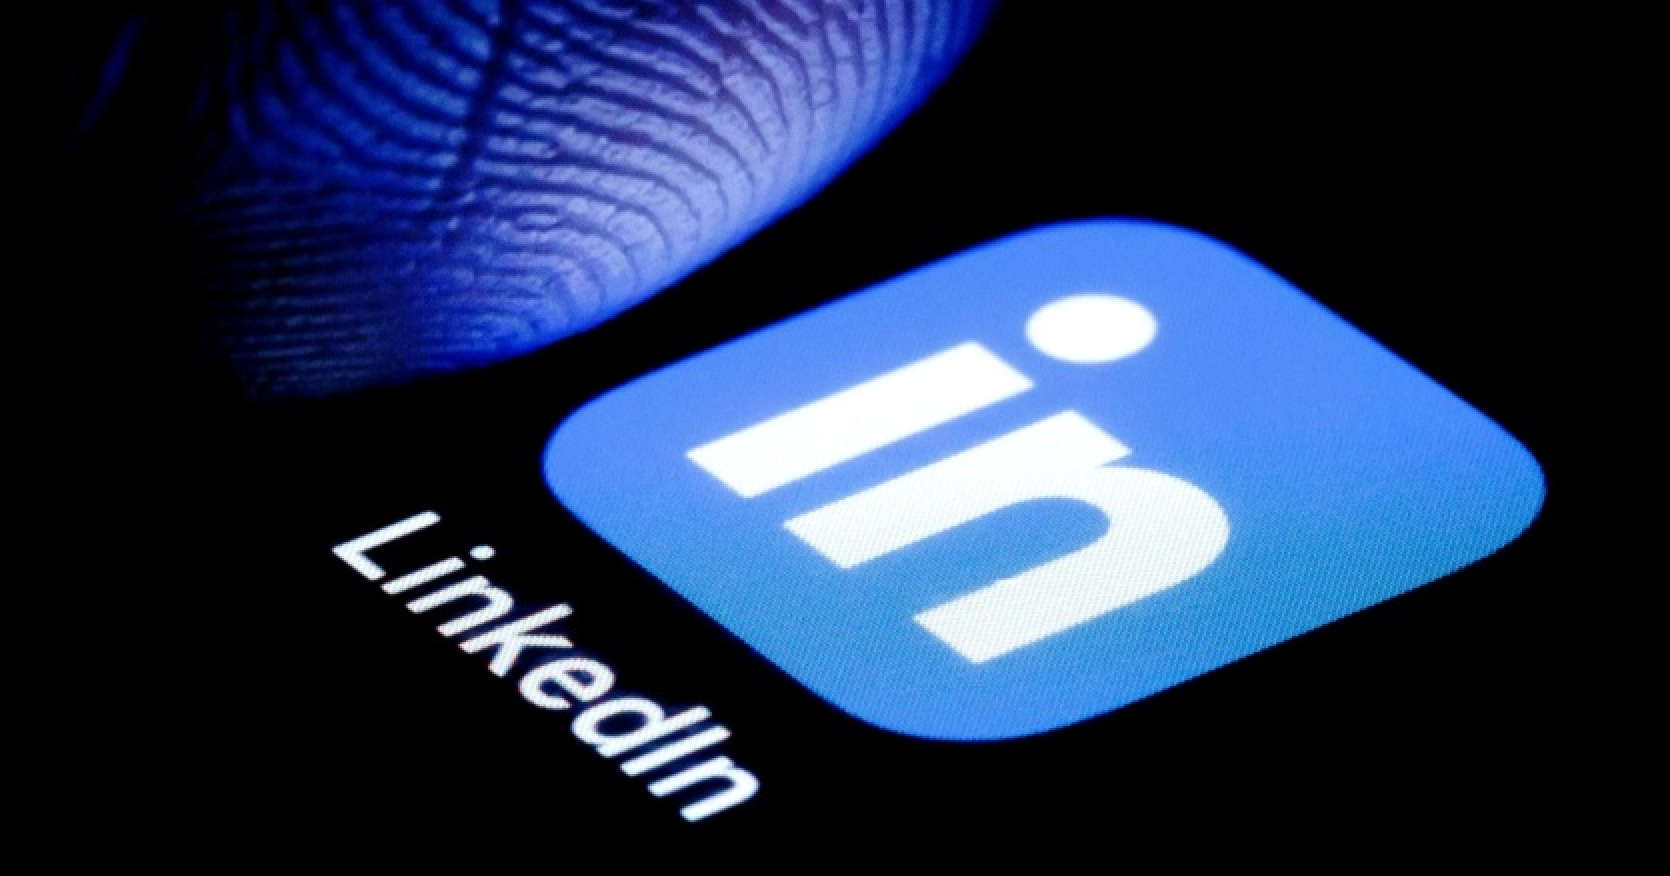 LinkedIn is testing content creation and follower recruitment with AI